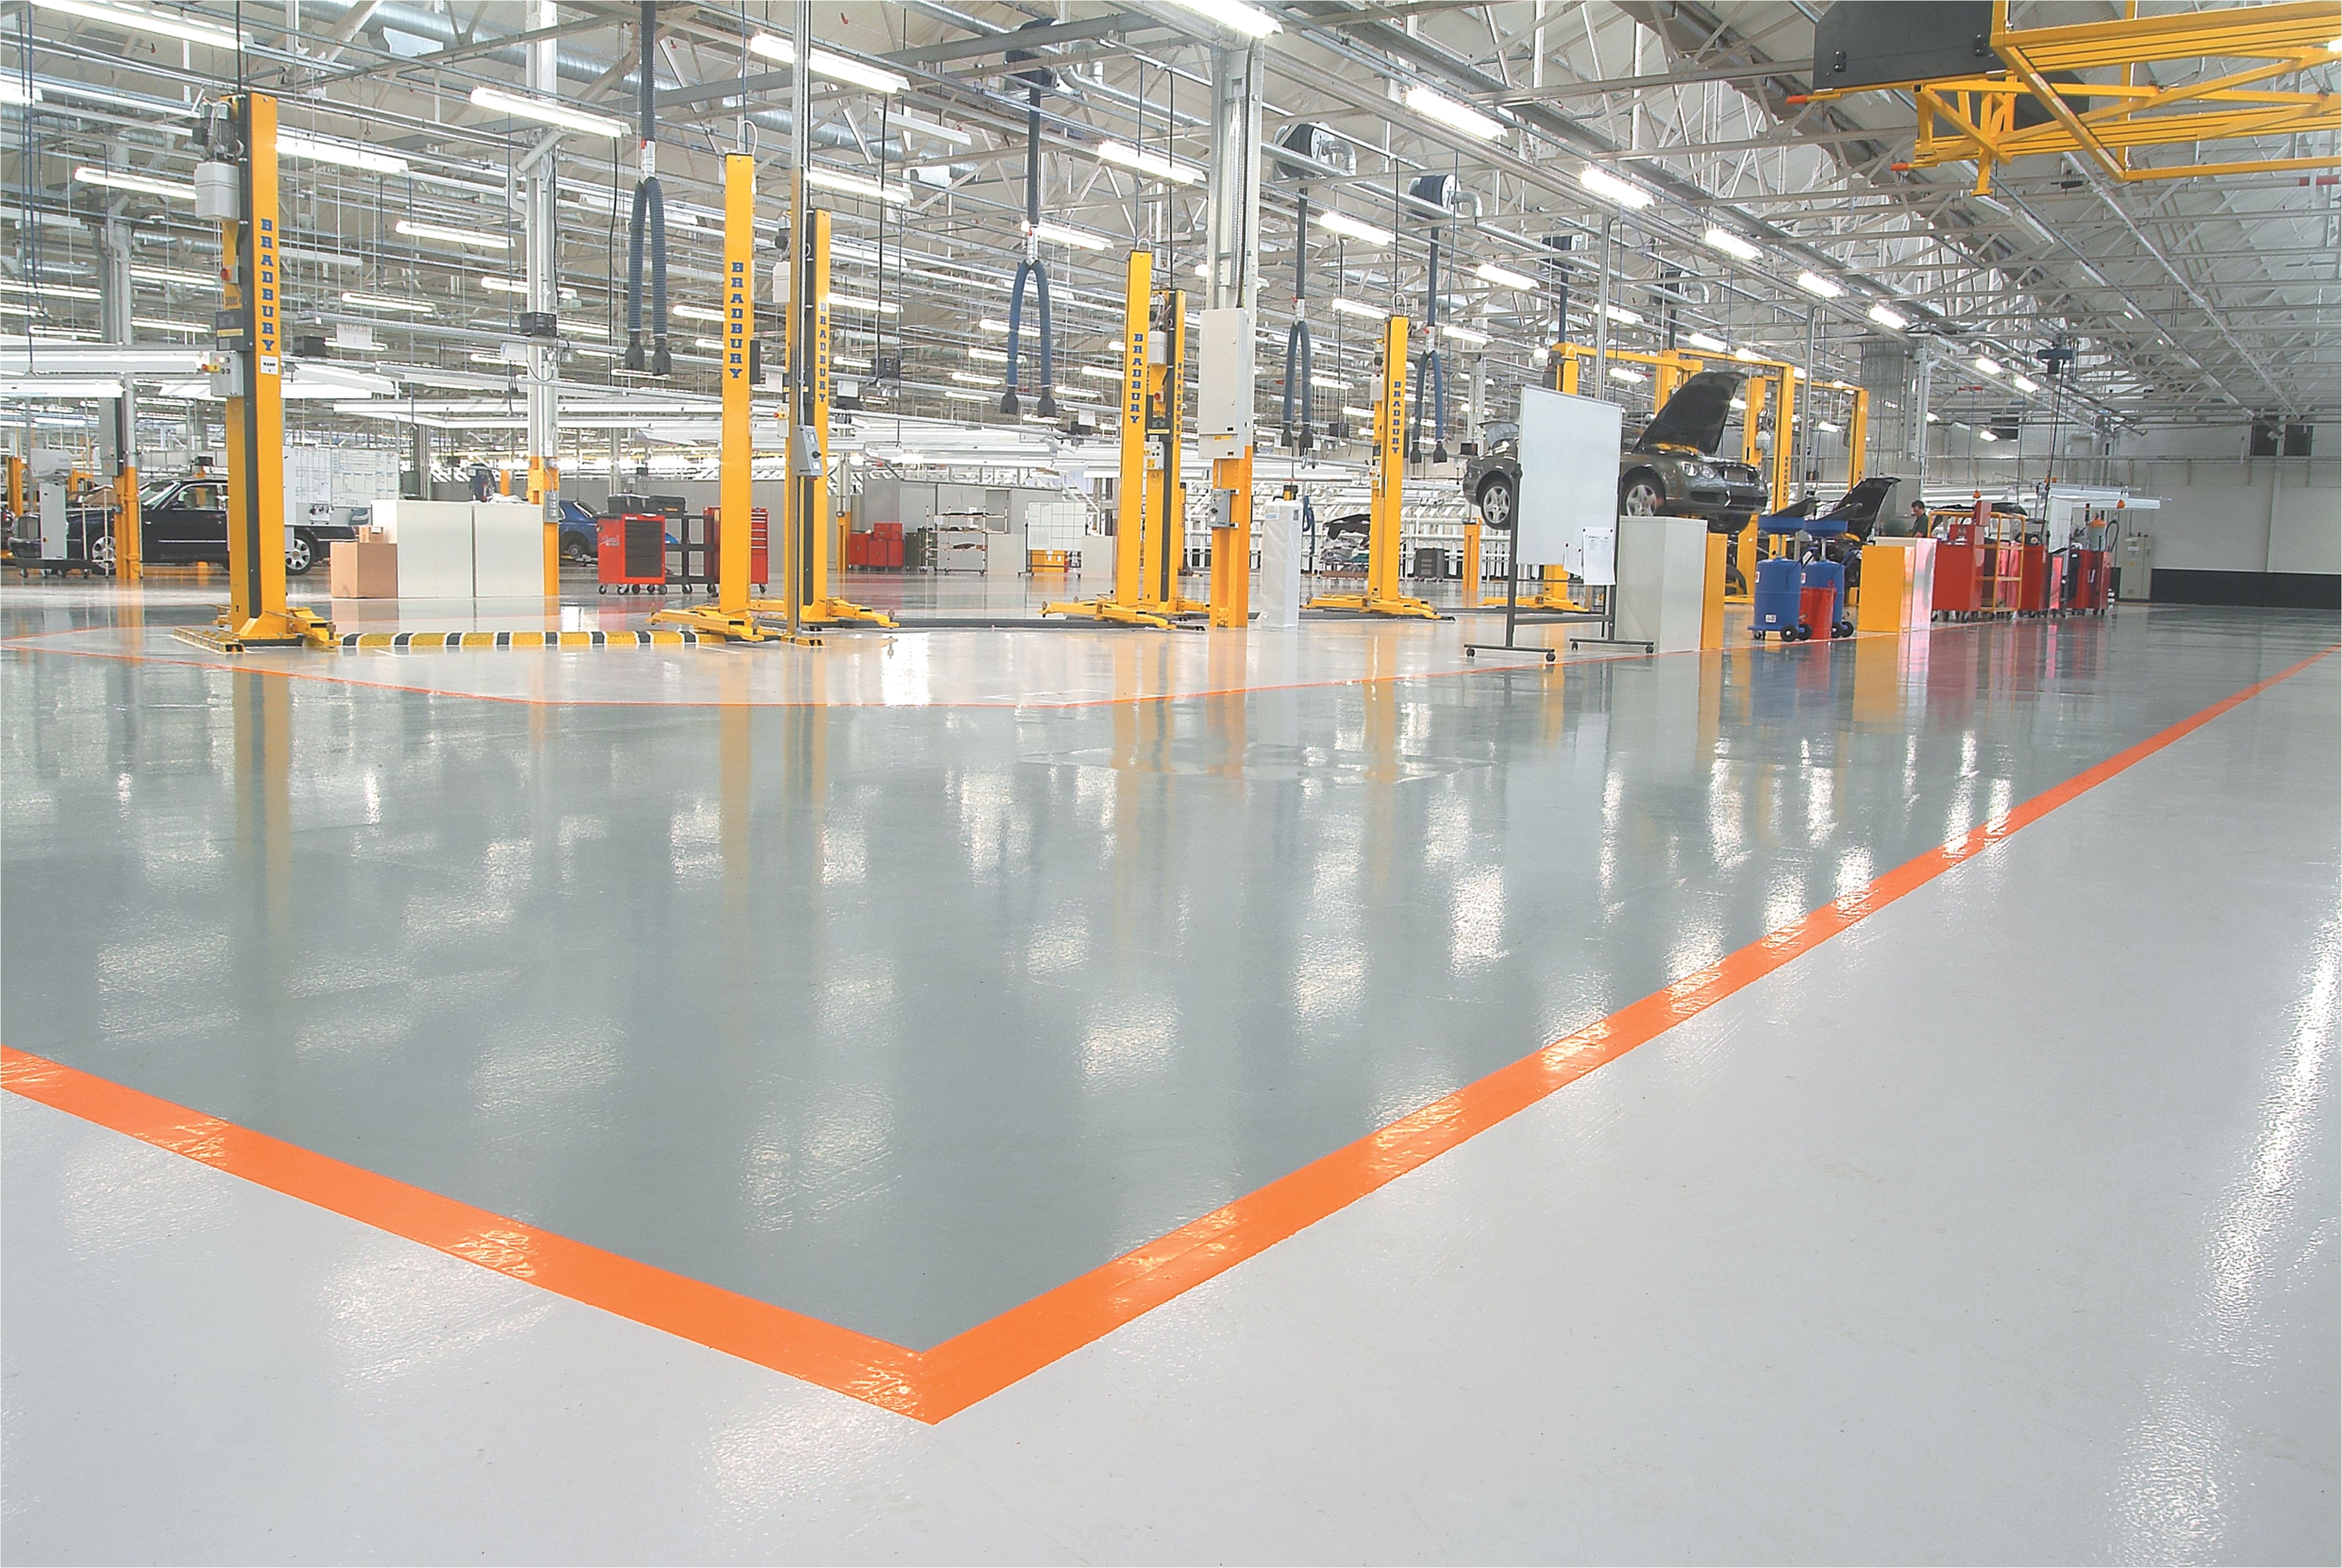 it s time to upgrade your industrial flooring with ucrete hf floors that are extremely tough and have many physical properties